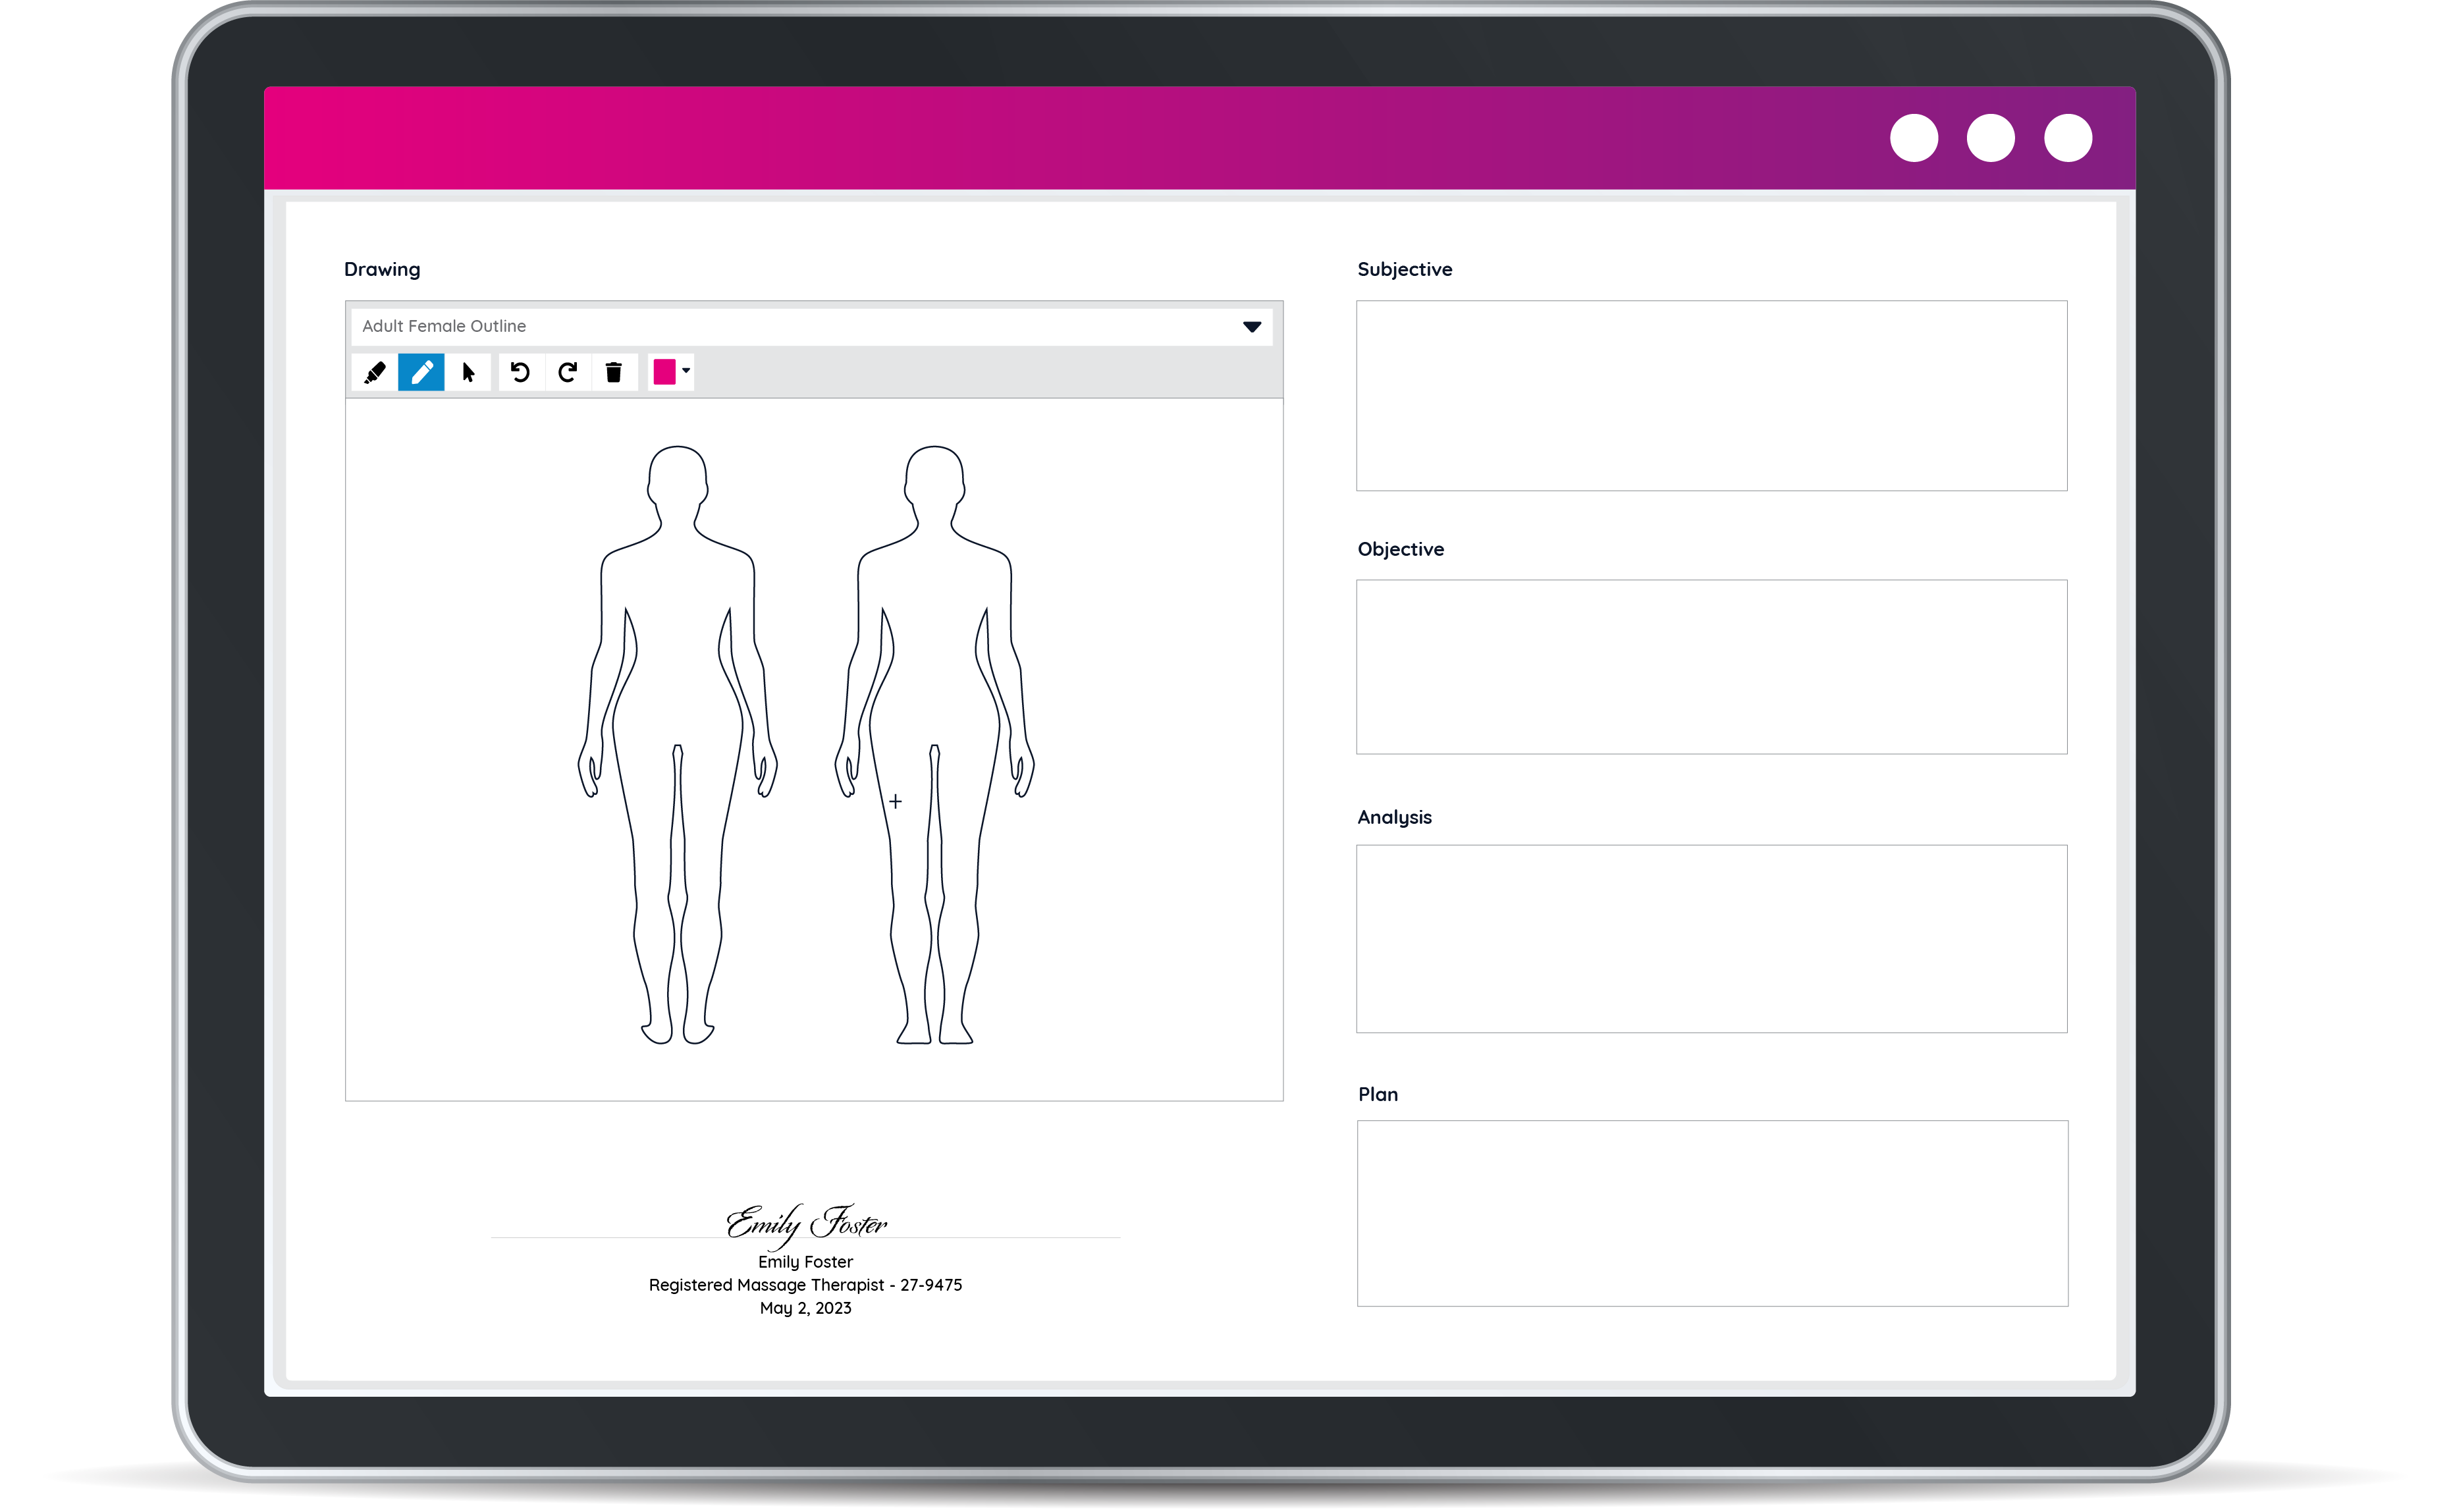 The empty SOAP charting file of an osteopath using GOrendezvous on an ipad